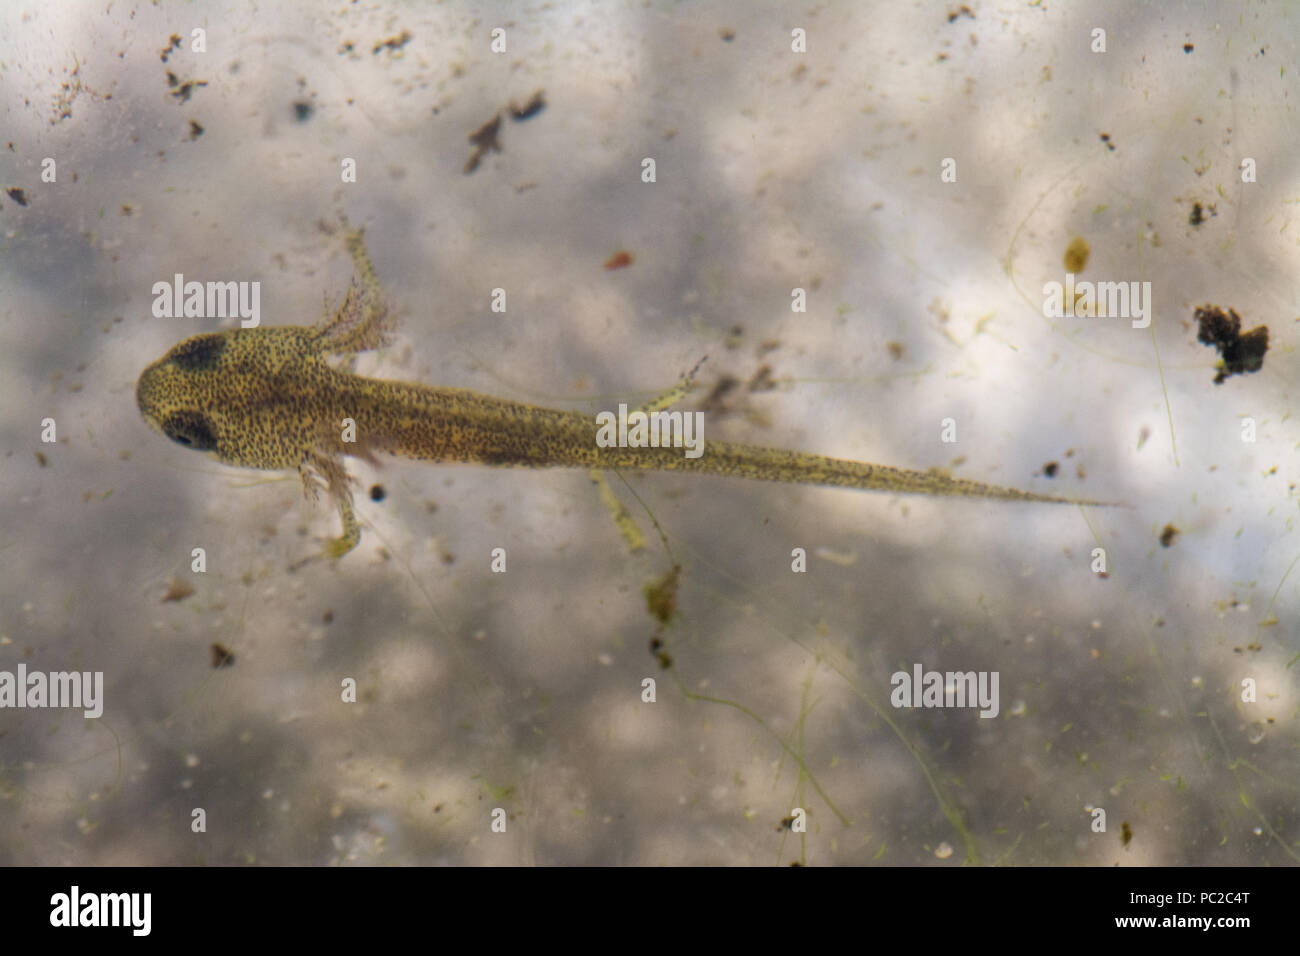 Young smooth newt (common newt, Lissotriton vulgaris) in aquatic phase, swimming in a garden pond during summer Stock Photo